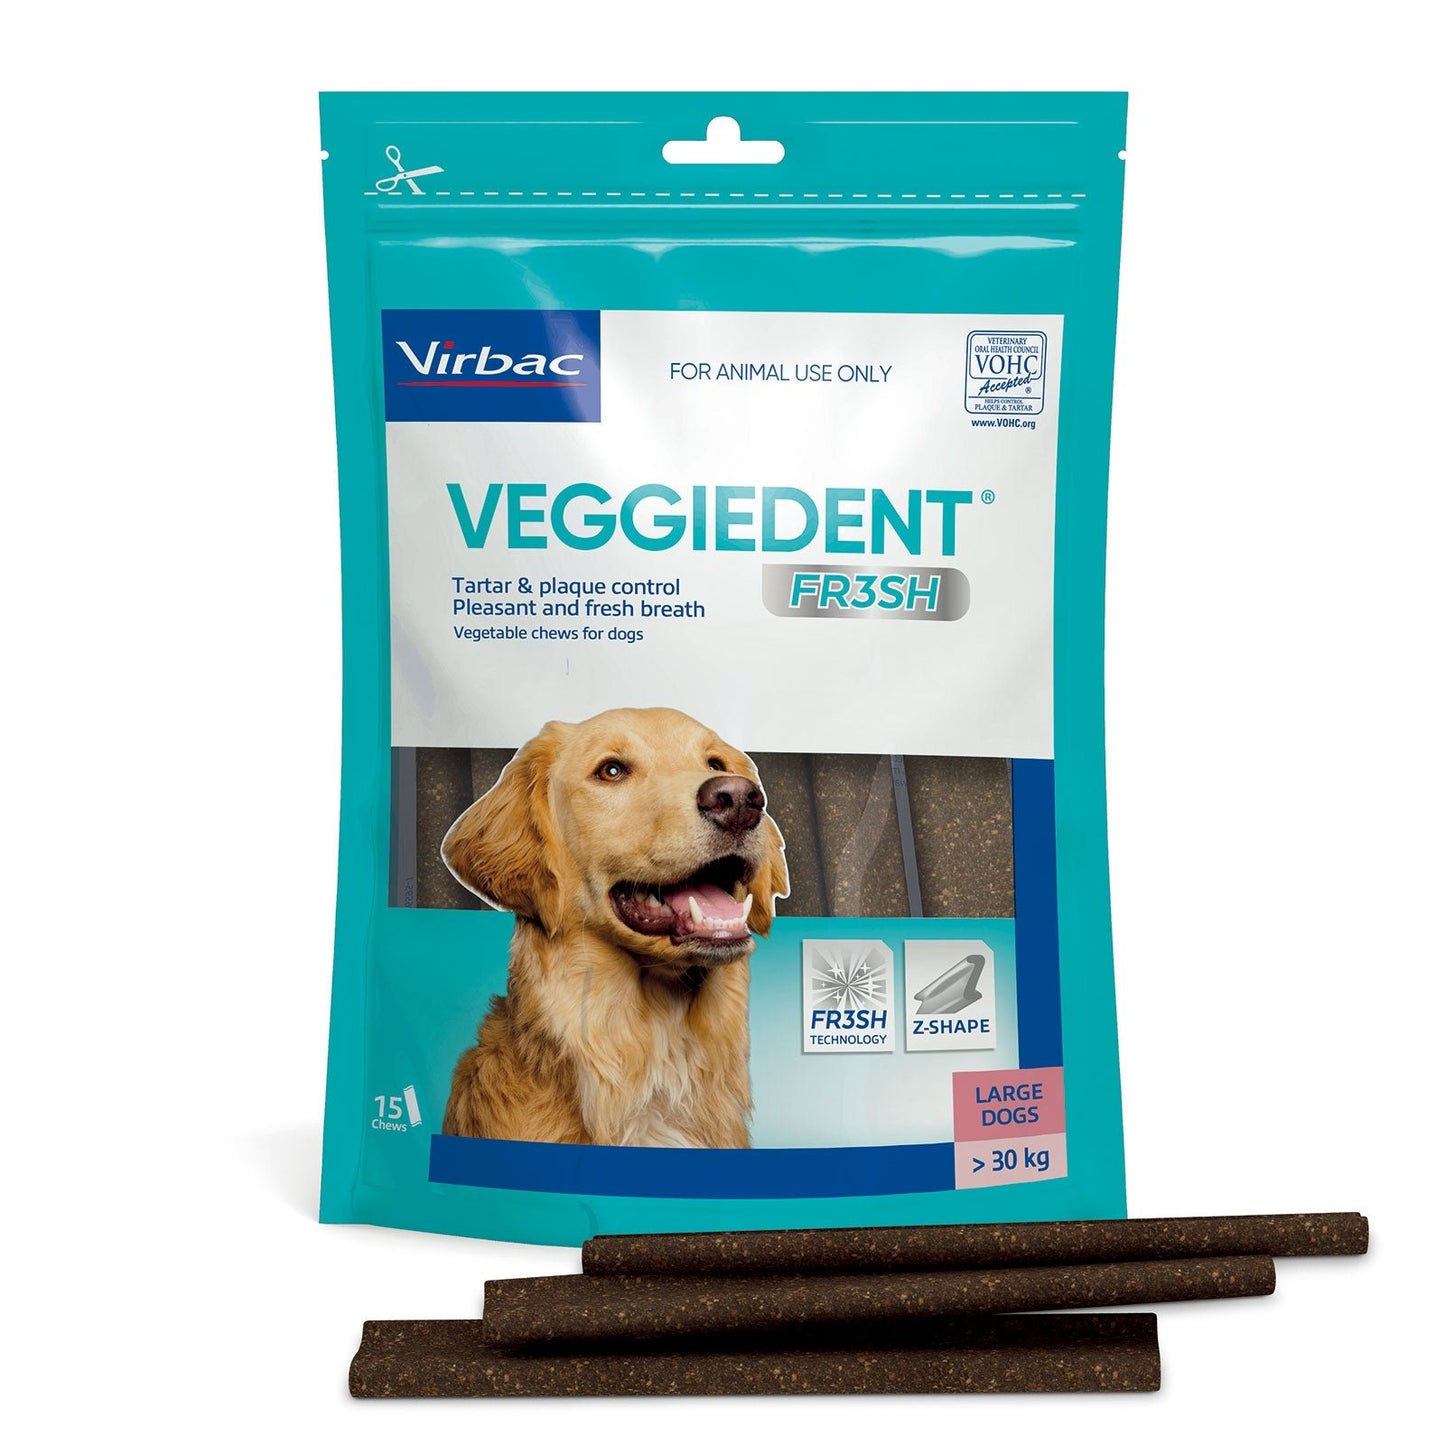 Veggiedent Dental Chews for Dogs 15 Pack Extra Small - Woonona Petfood & Produce